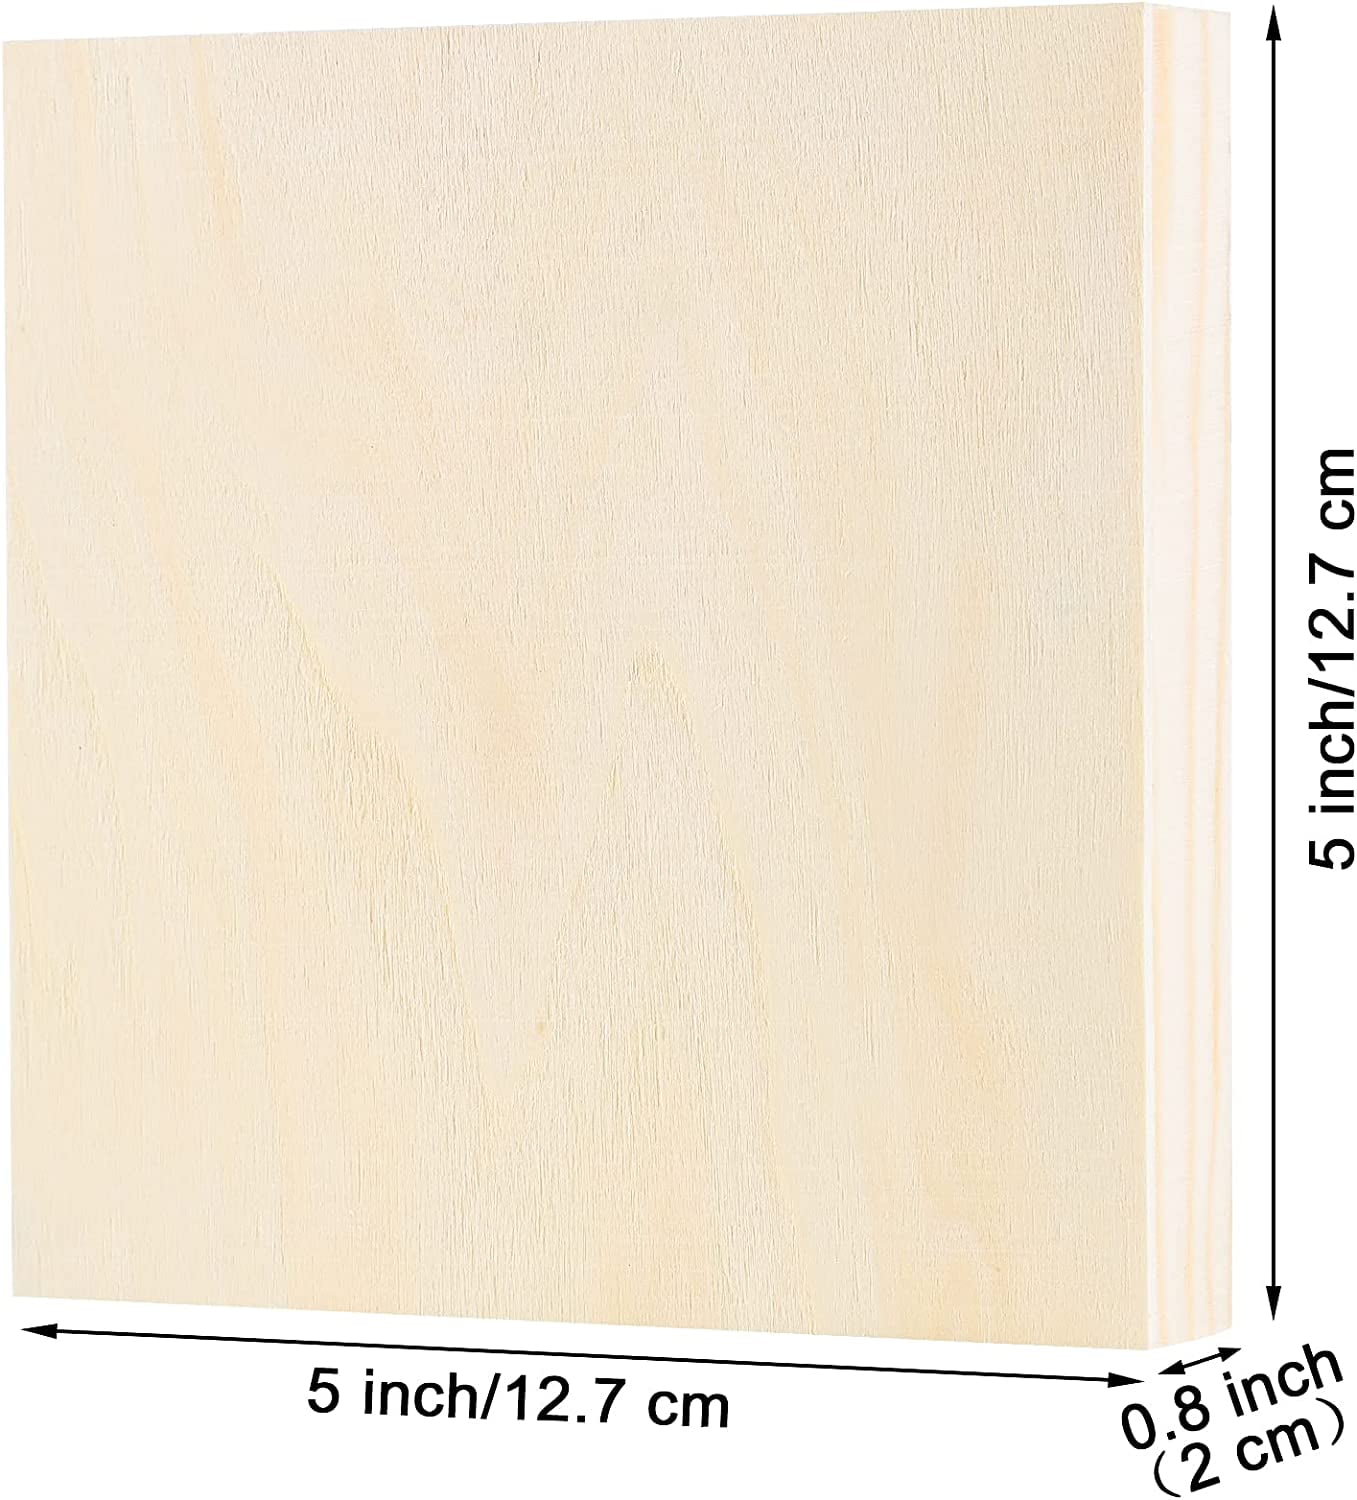 PHOENIX Unfinished Wood Panel Boards for Painting - 6x6 Inch / 8 Pack  Birchwood 3/4 Deep Square Cradled Wooden Board for Crafts, Wood Burning 